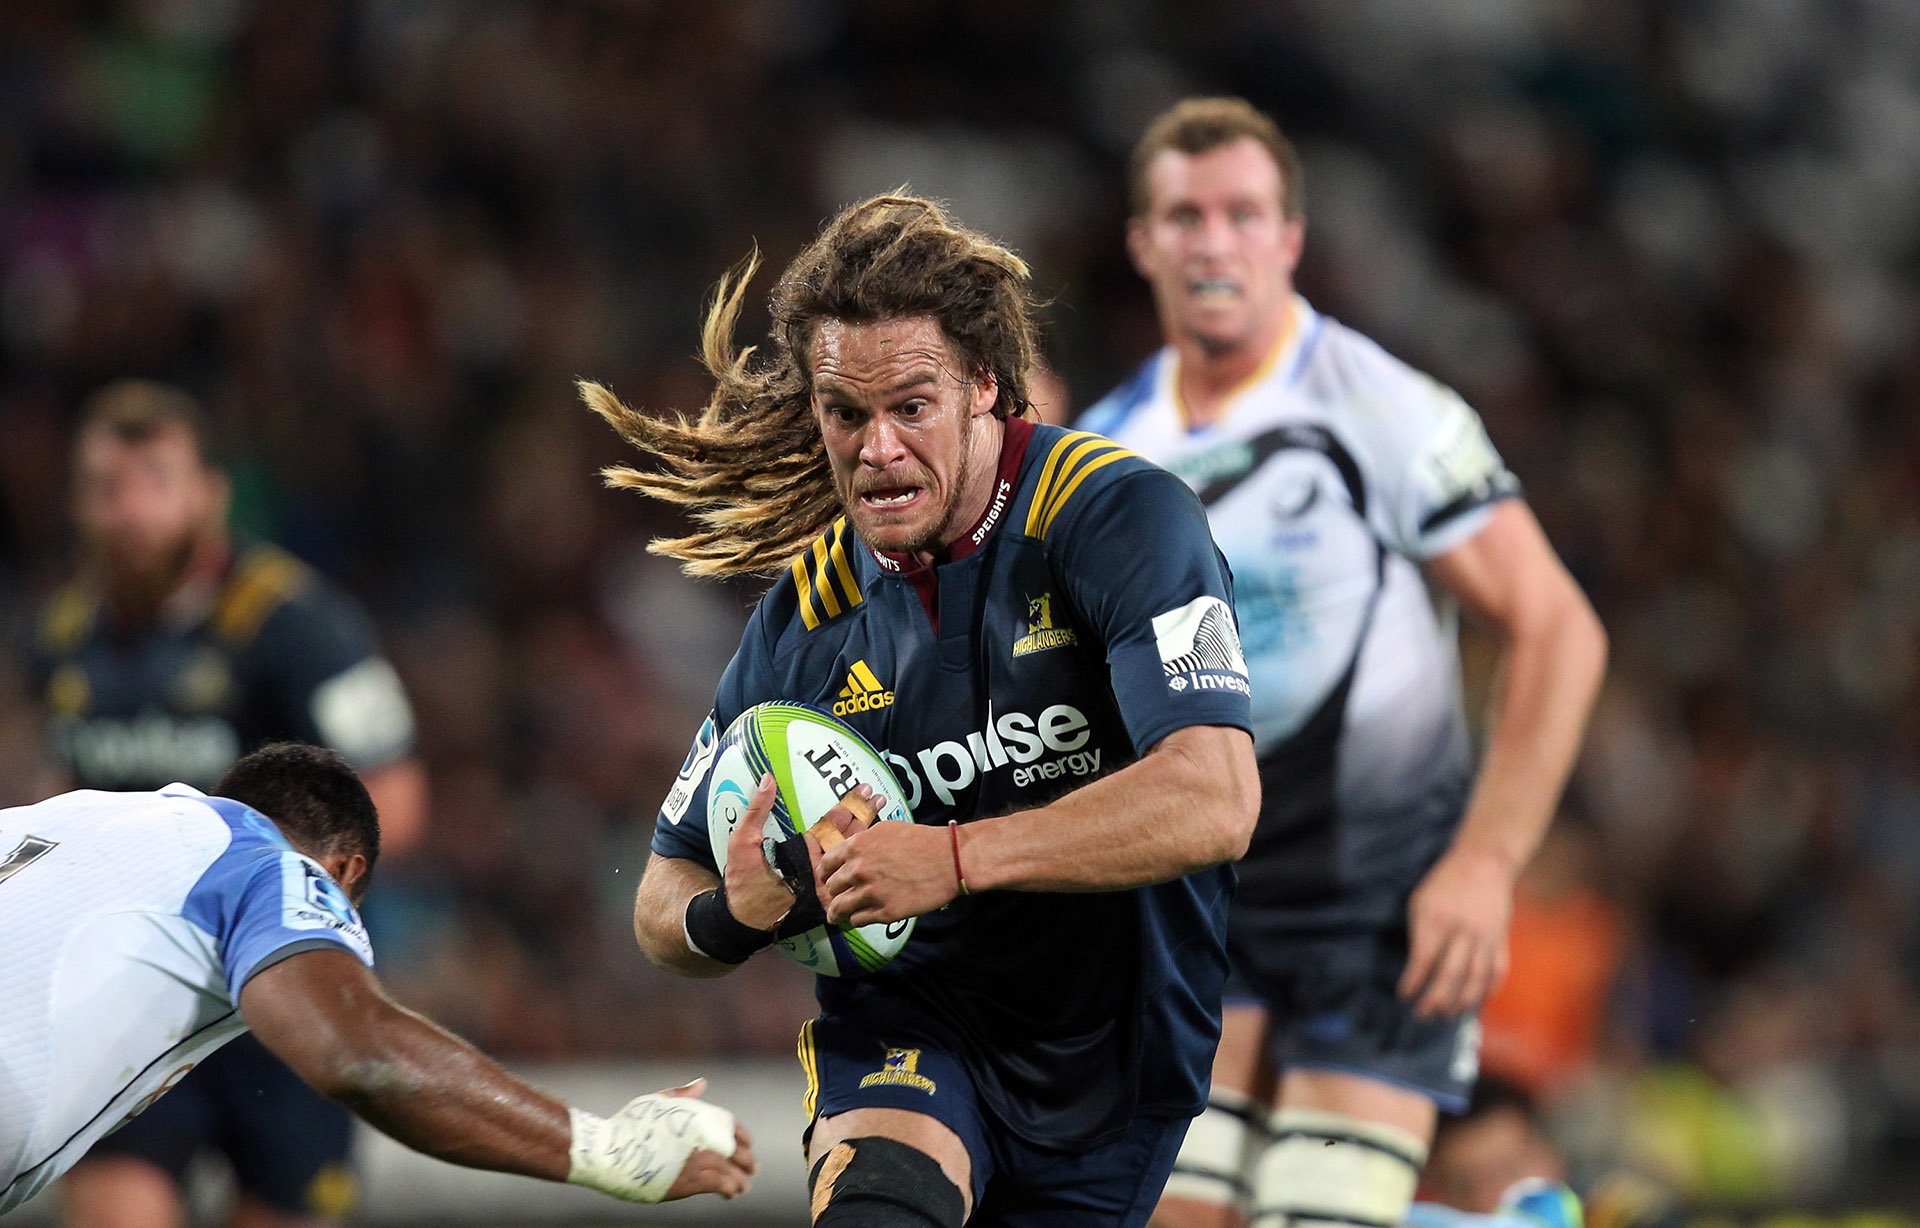 Another Highlanders loose forward Japan bound